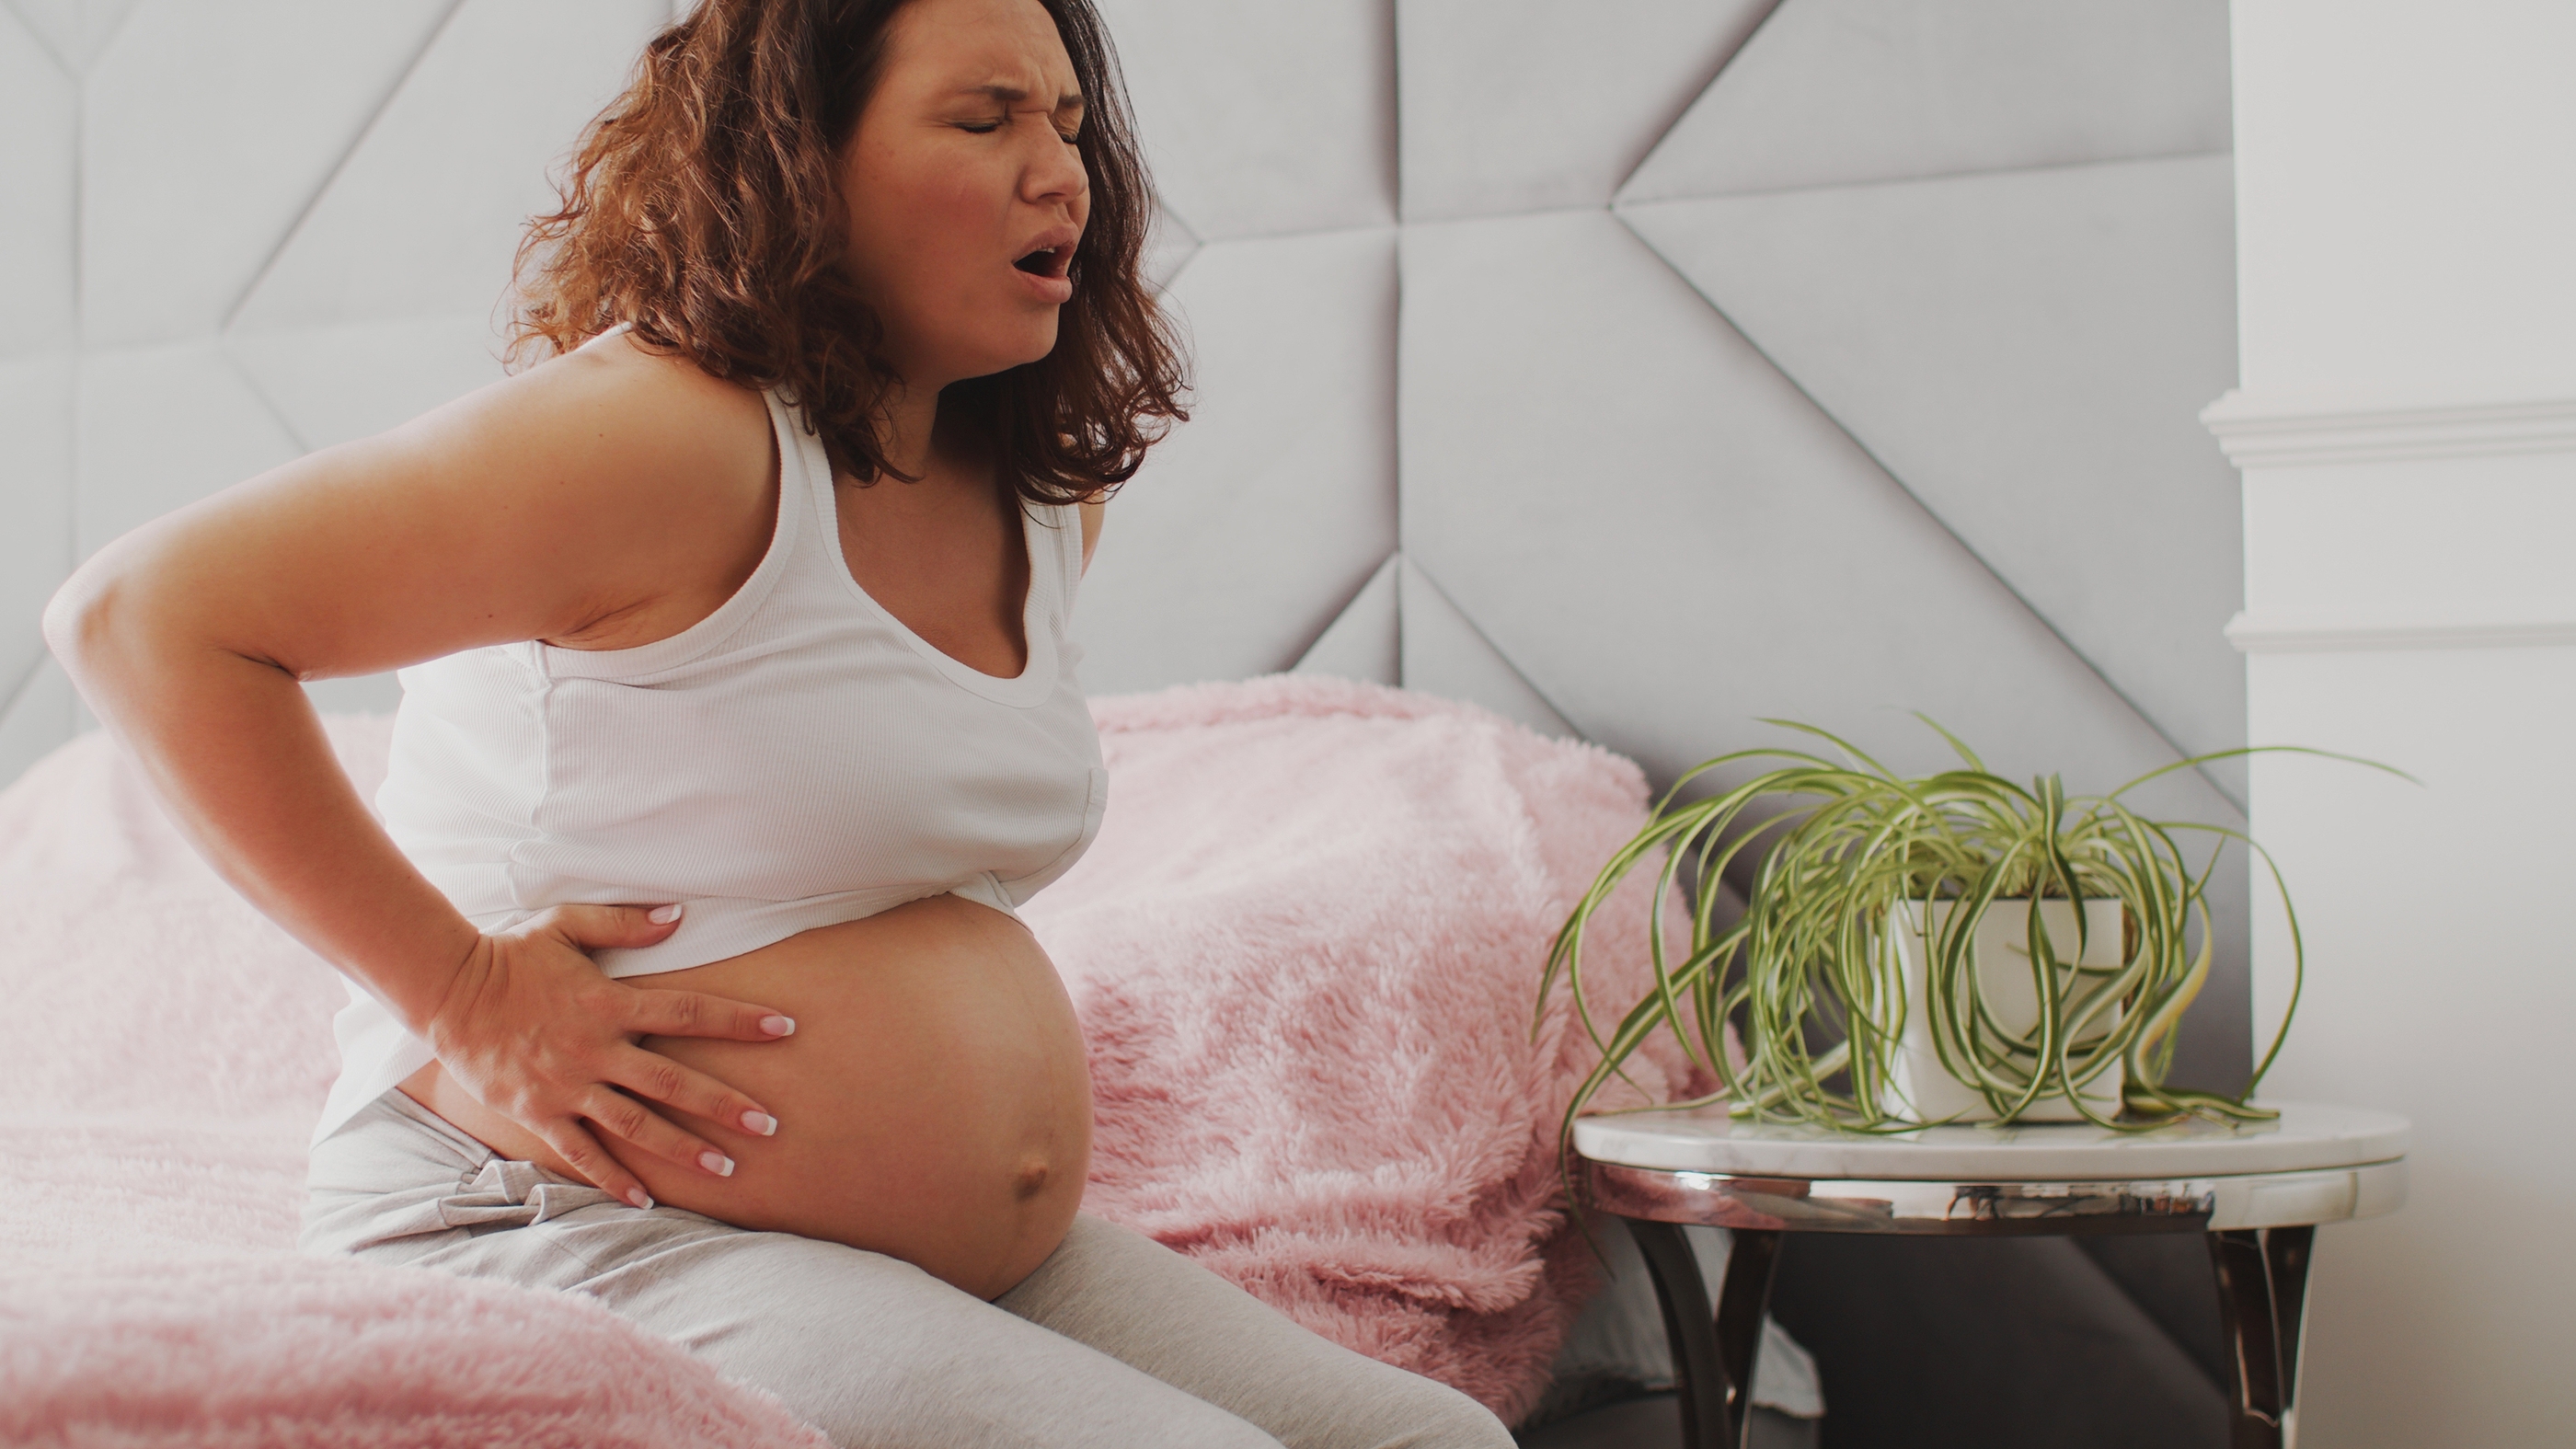 Kidney Stones While Pregnant Symptoms and Treatment